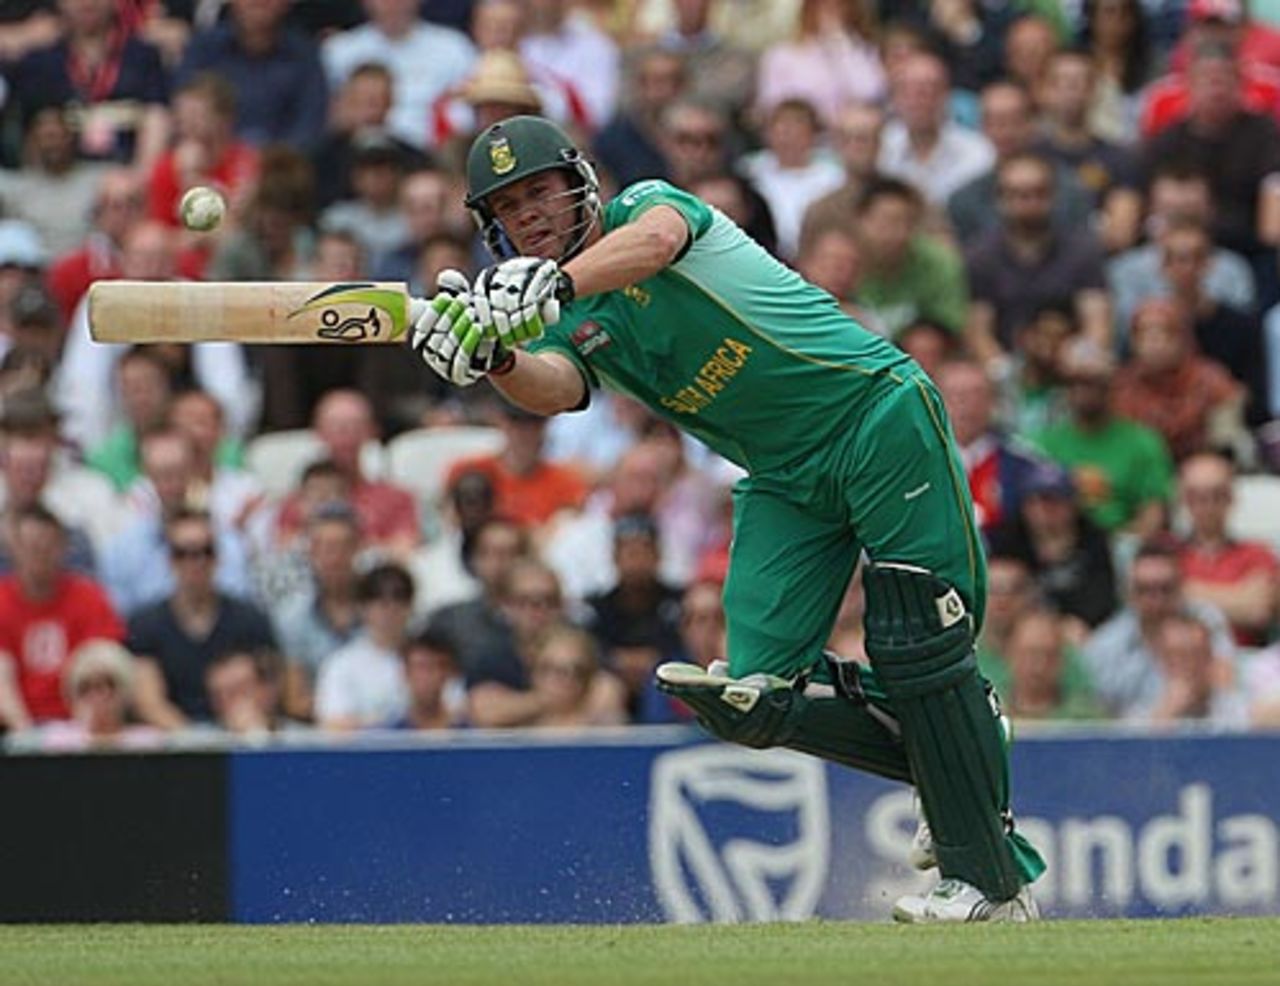 AB de Villiers clips one off his pads, Scotland v South Africa, ICC World Twenty20, The Oval, June 7, 2009